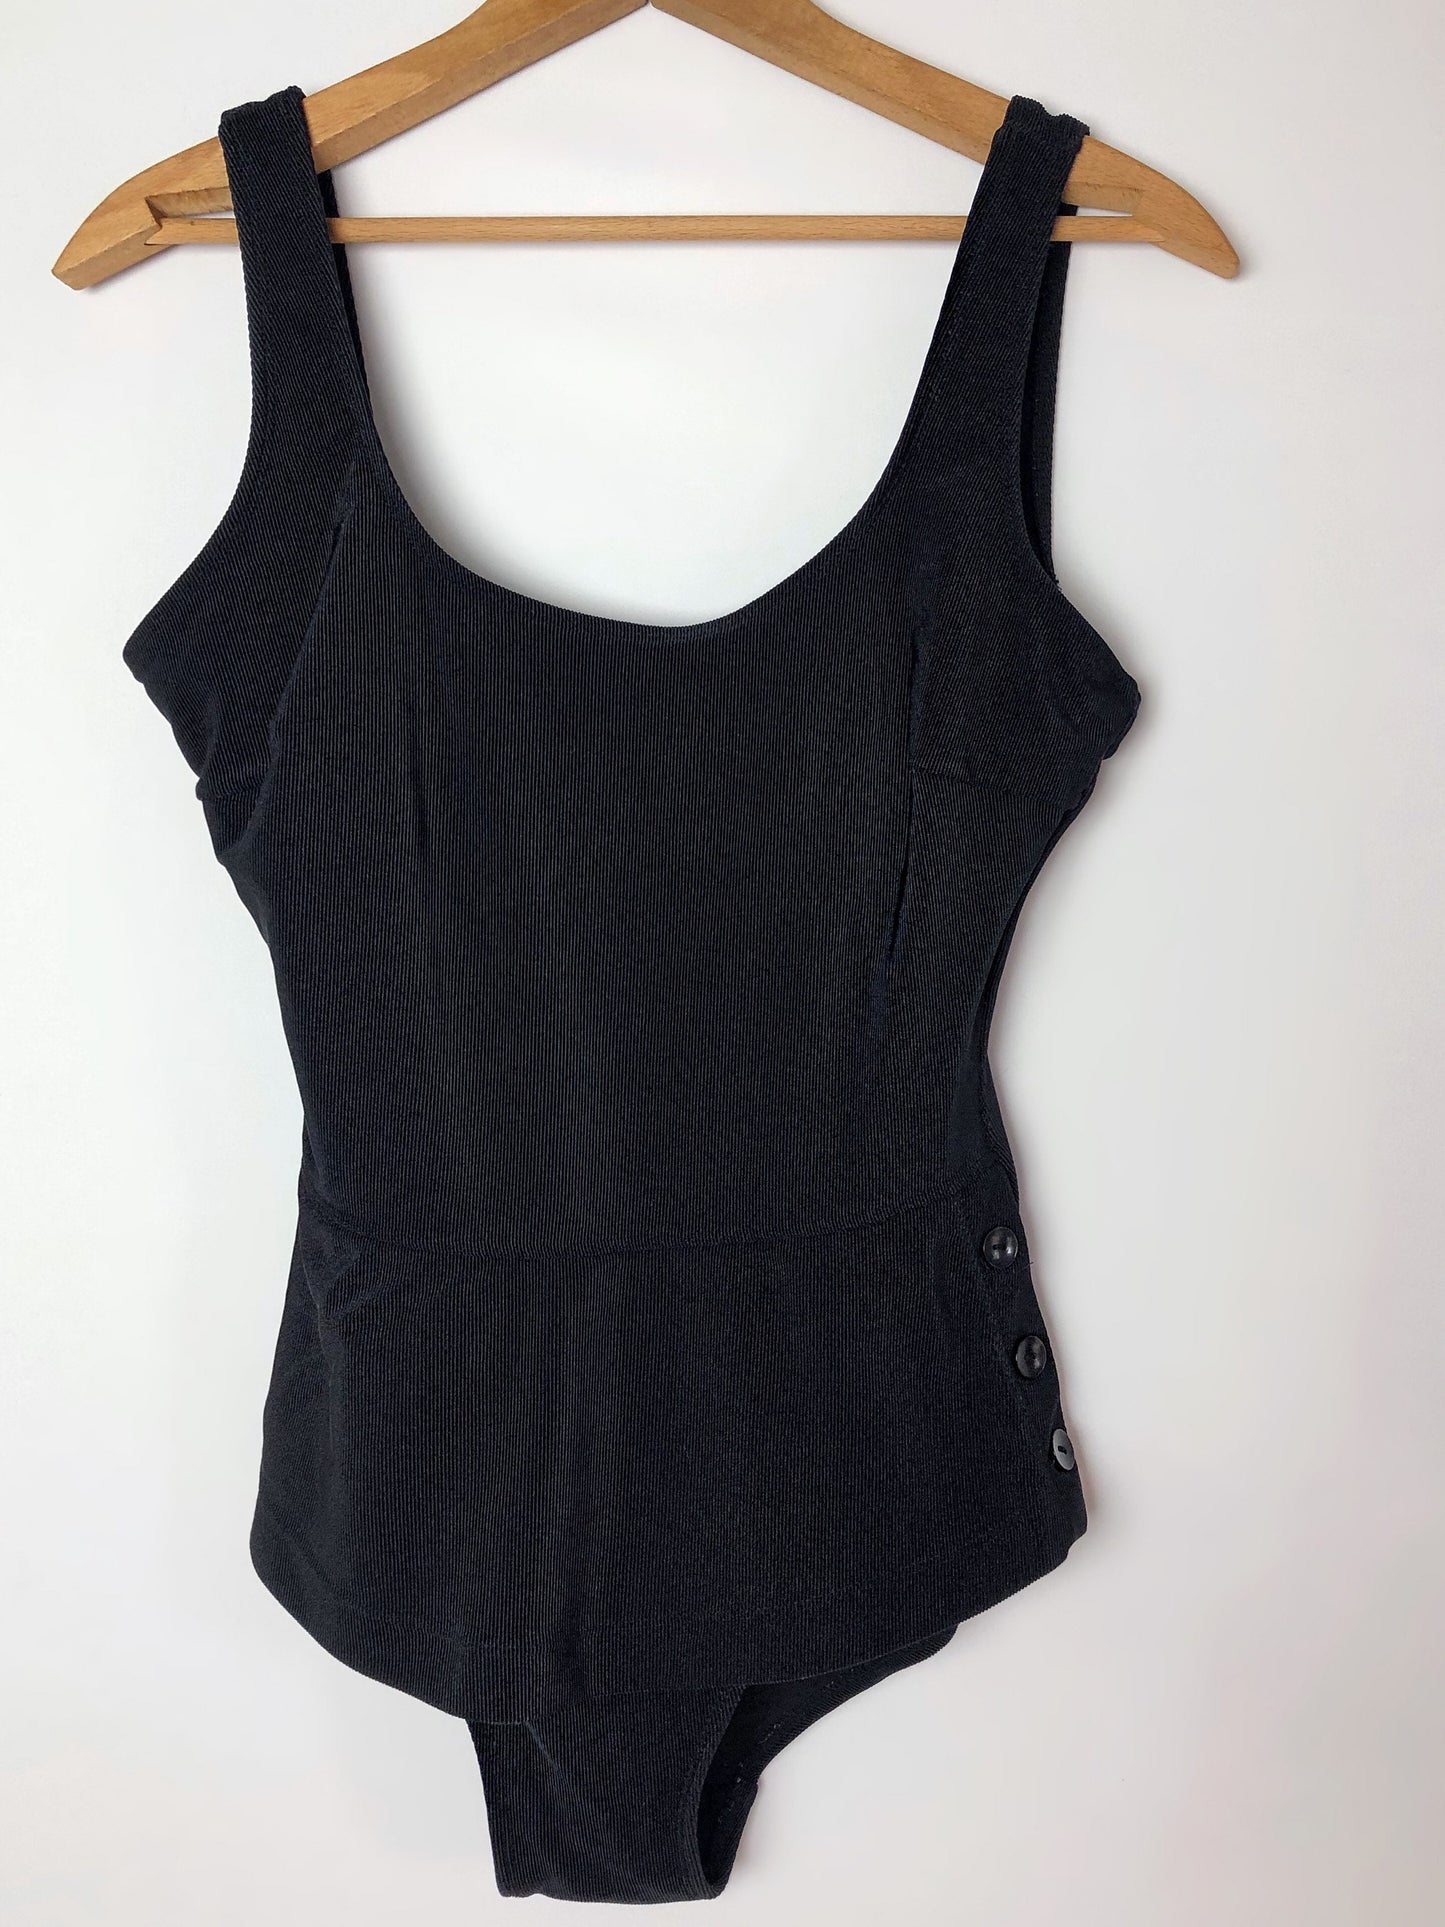 Vintage 90’s Black Ribbed Newport News Soft Cup Skirted One-Piece Swimsuit Size 8